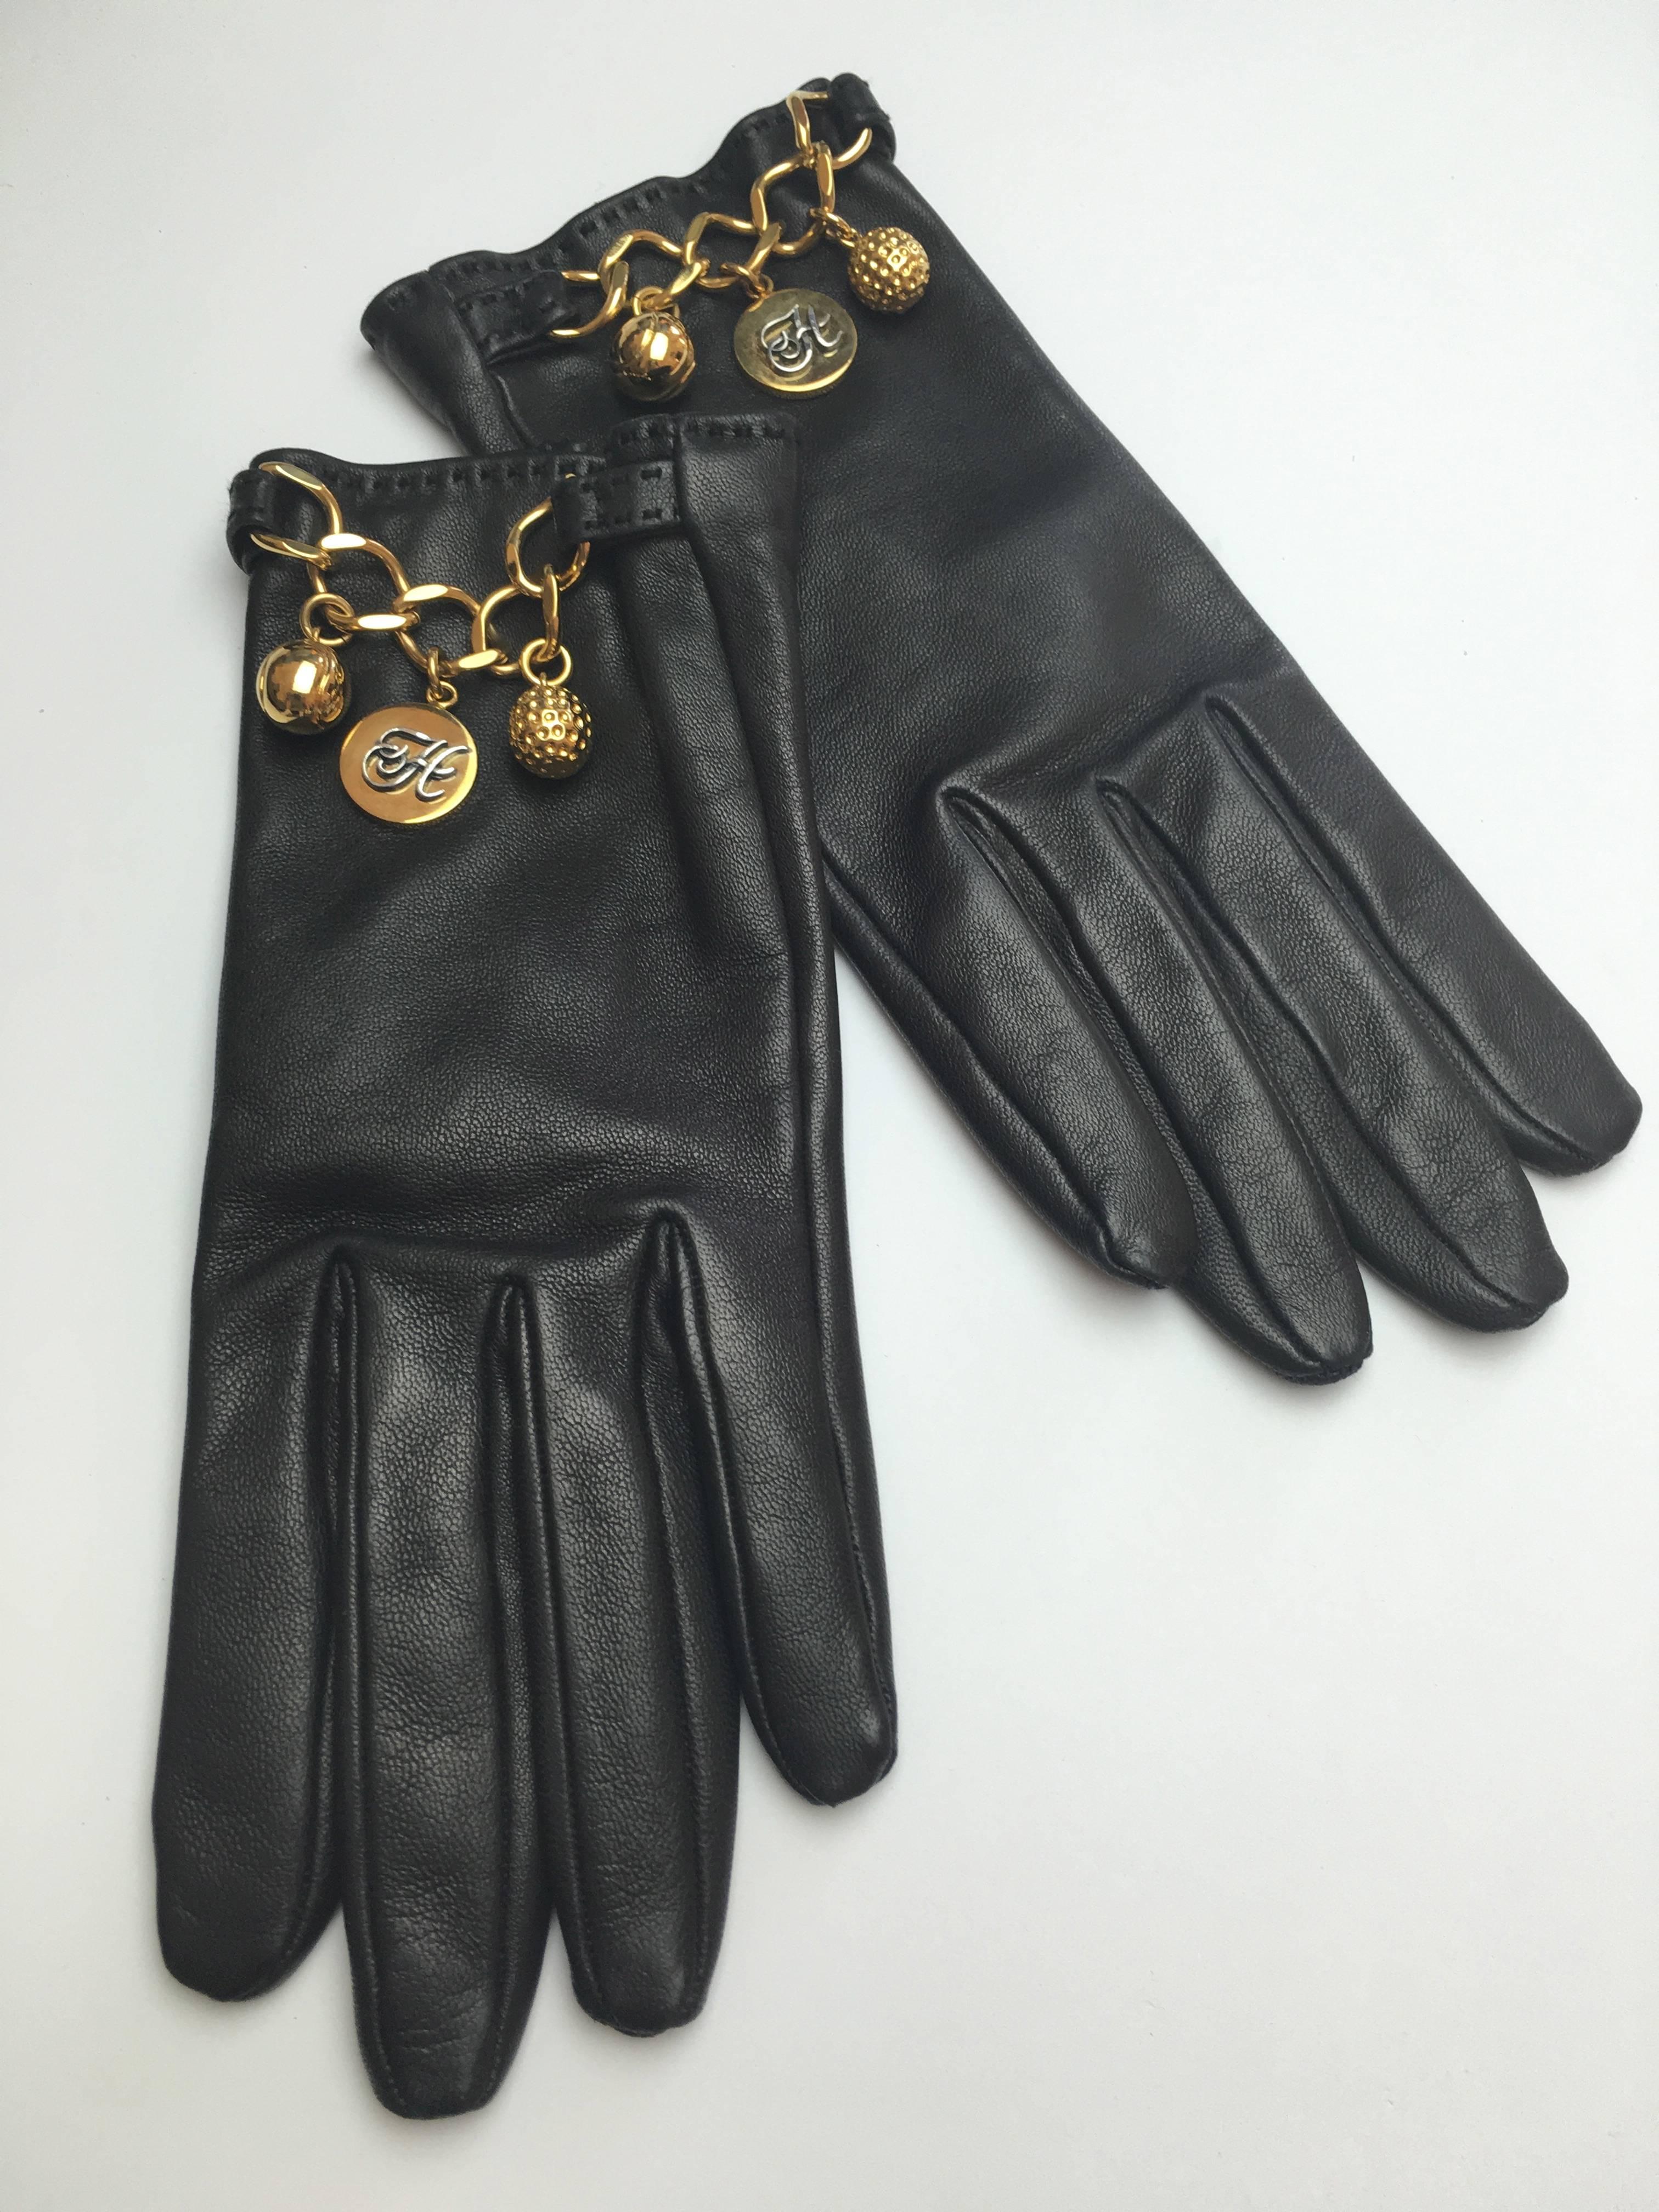 Impossible to find Hermes black lambskin gloves embellished with a gilded chain and three gilded charms including a Hermes logo medallion.

So sleek and elegant. Buttery soft leather in mint condition with original box.

Glove size:  6.5  So,